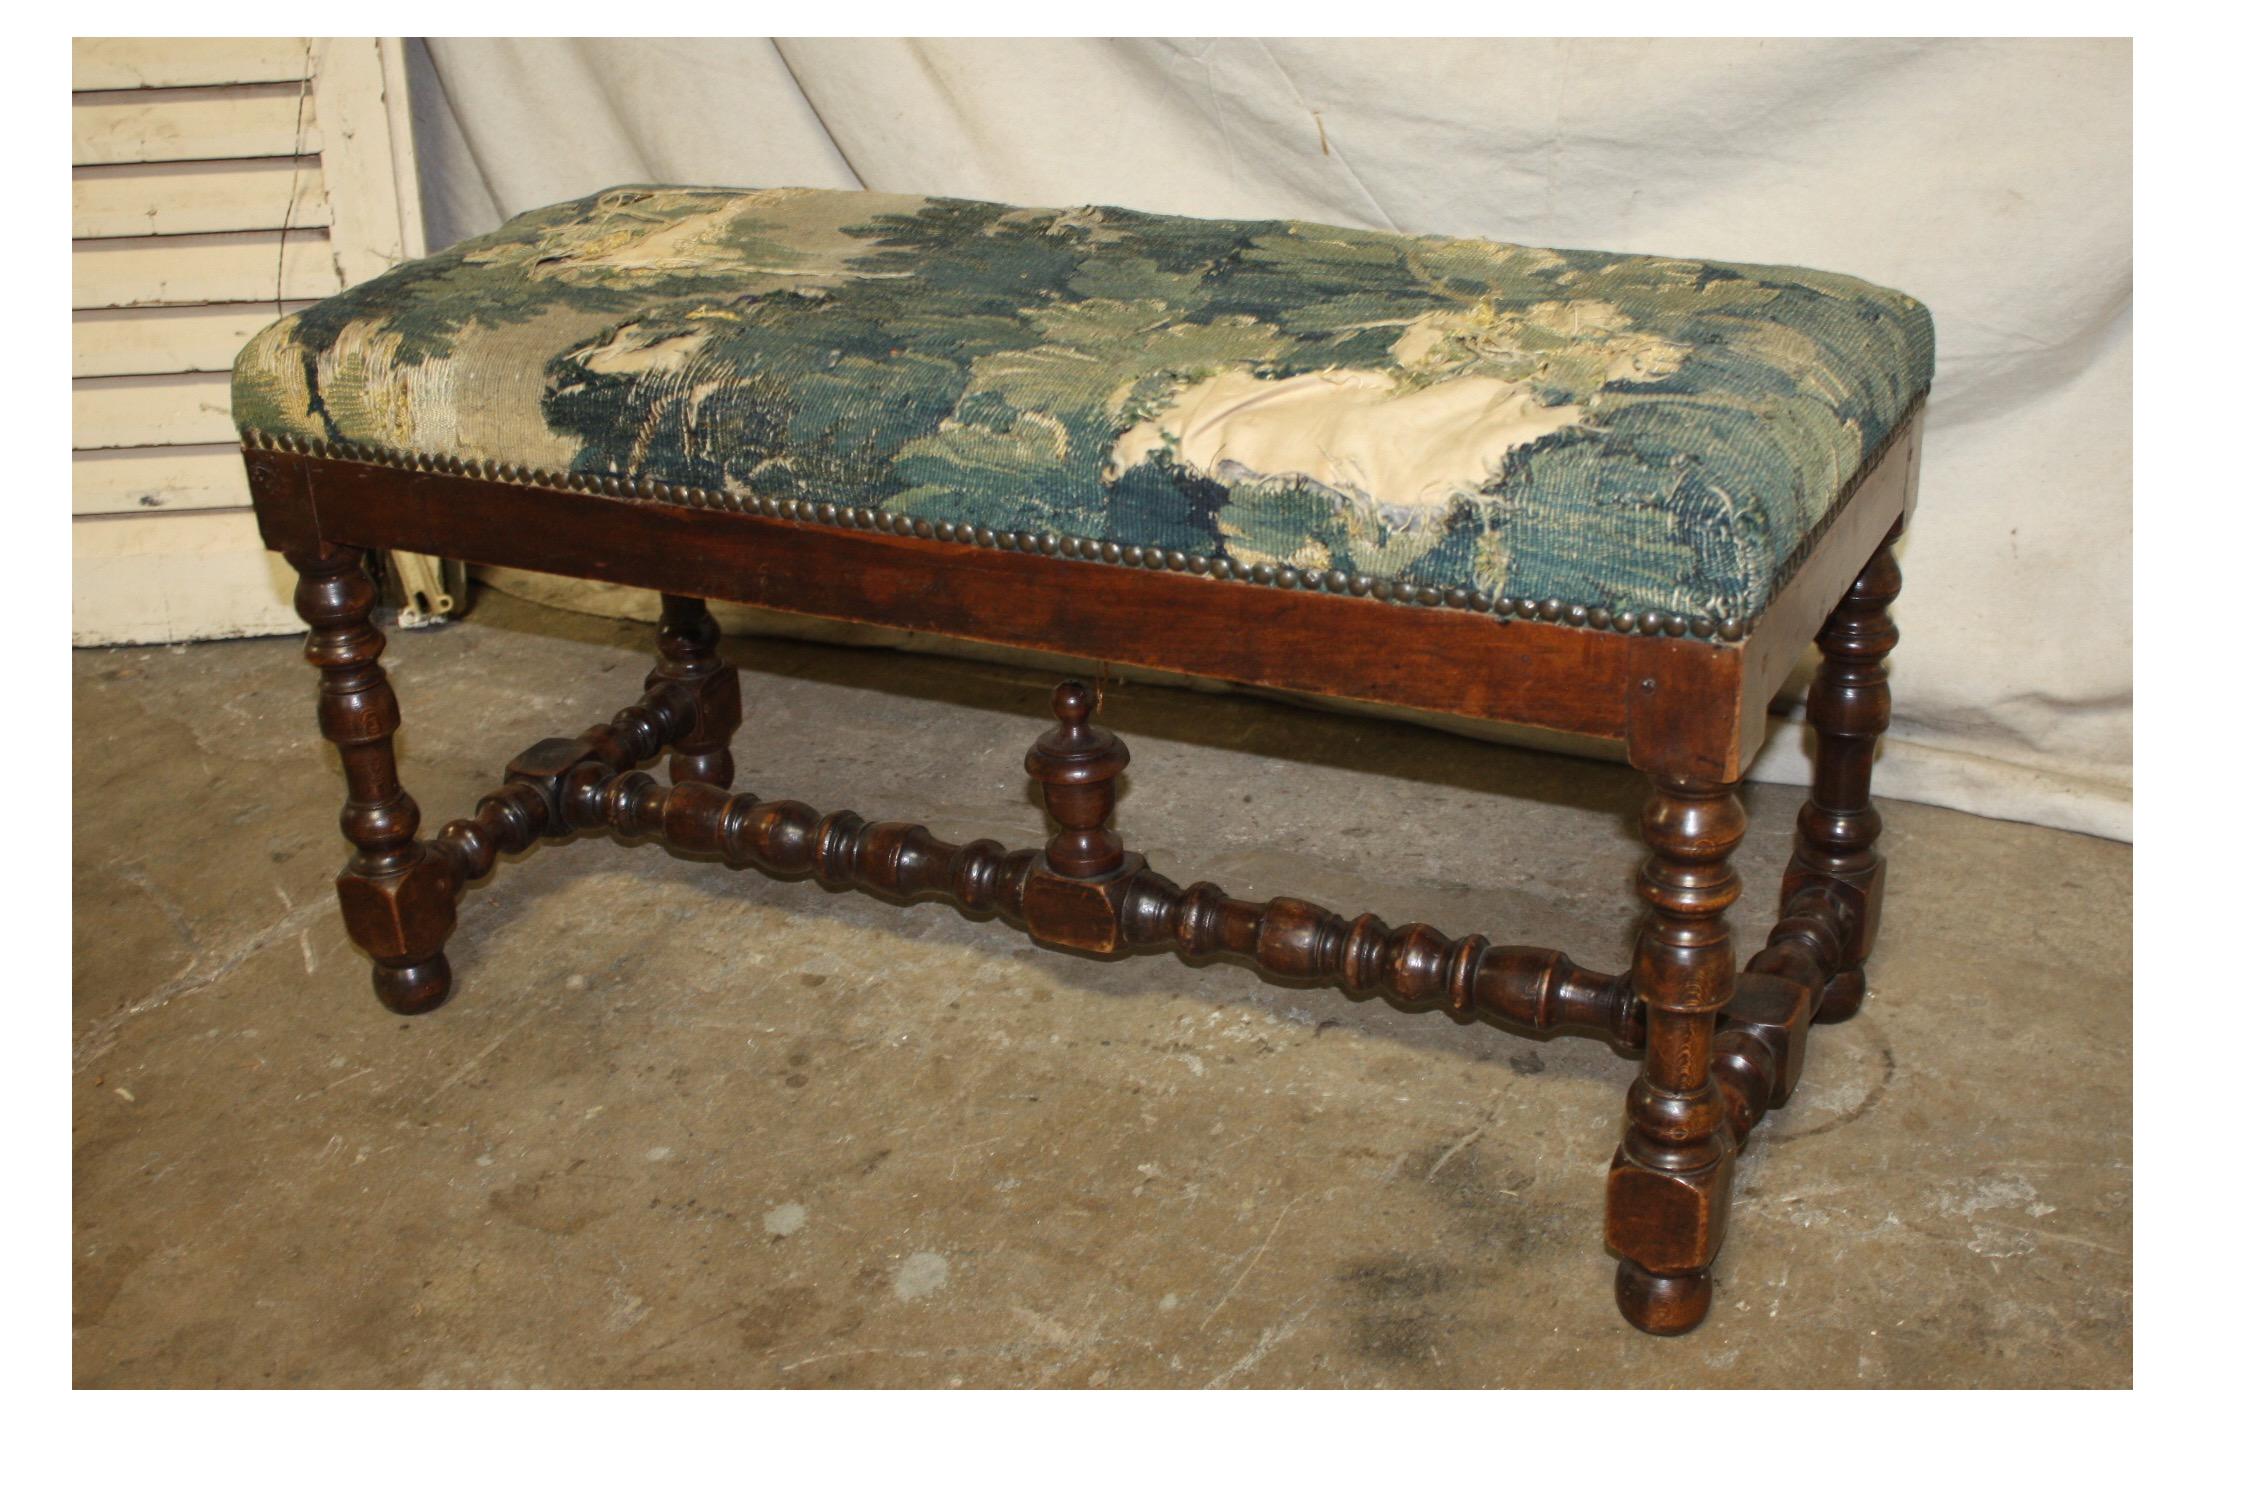 Late 18th century French bench cover with Aubusson tapestry.